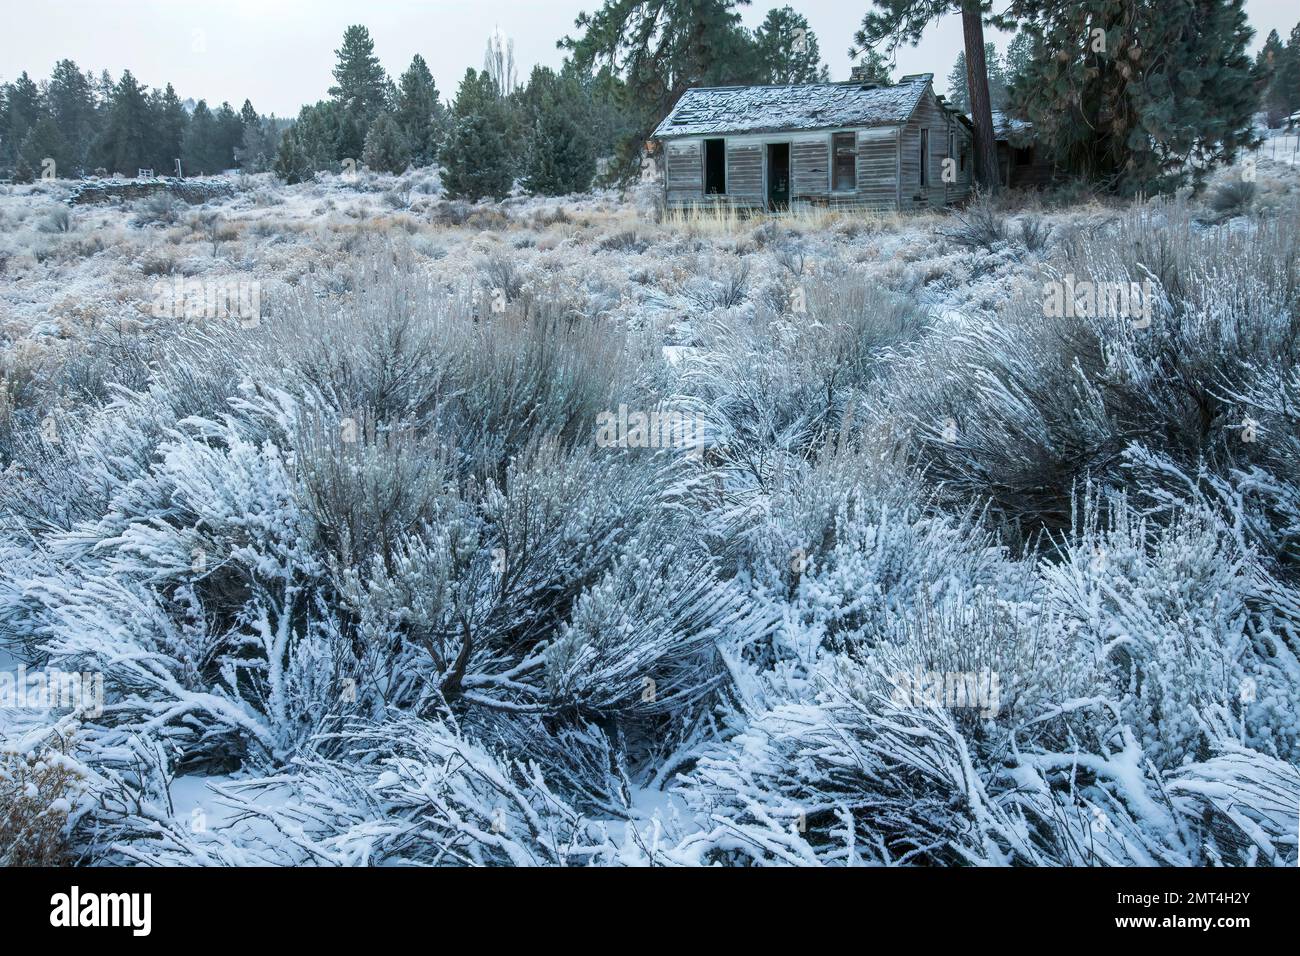 USA, Oregon, Central, Bend, Old Cookhouse in inverno Foto Stock